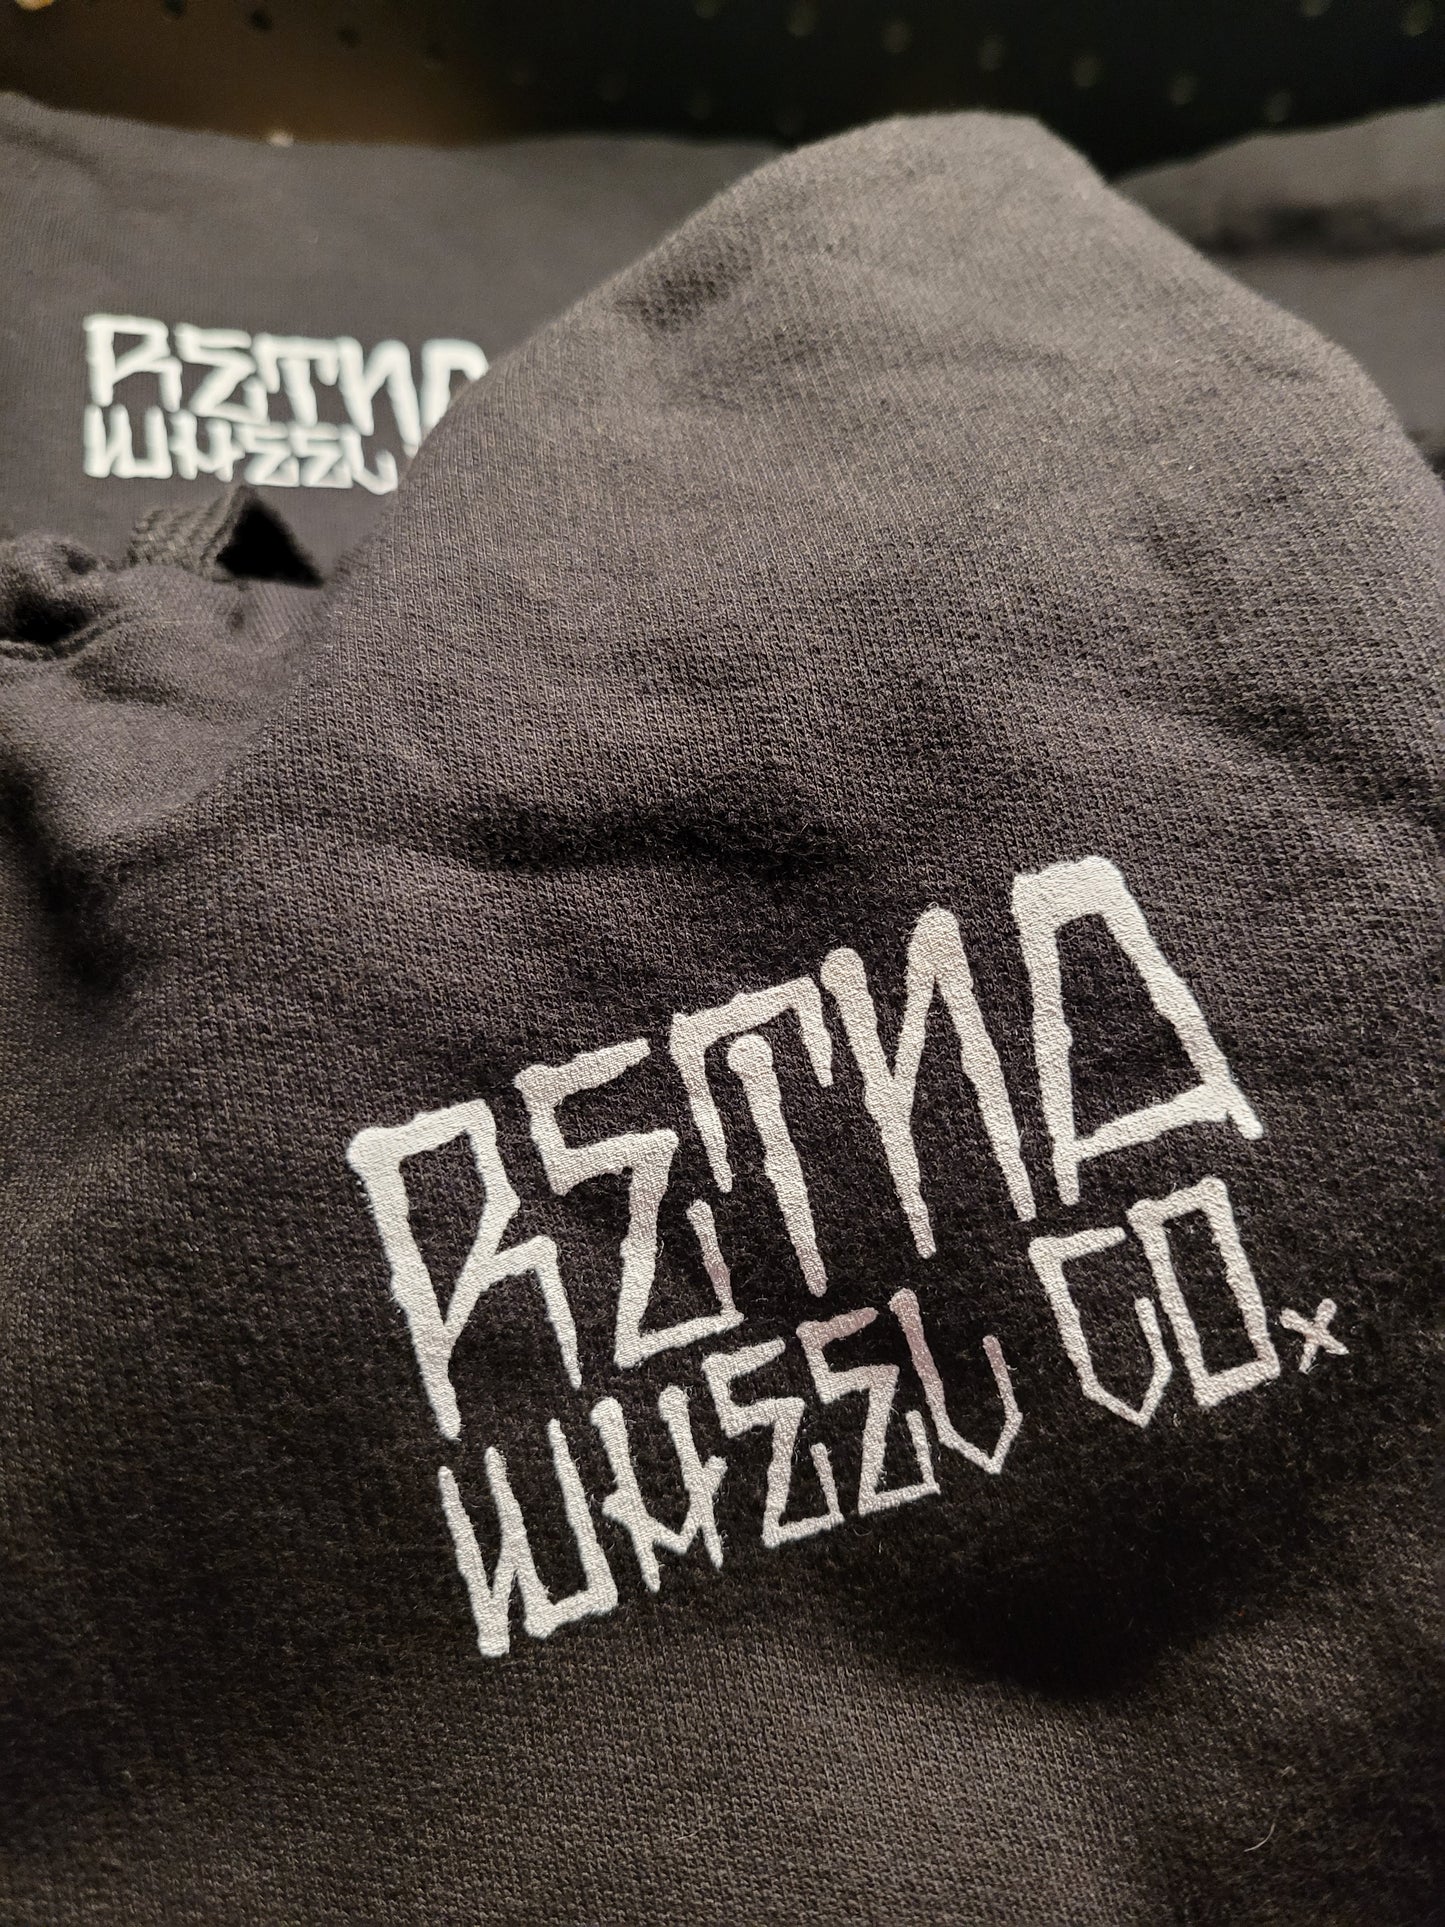 Retna - Skaters Supporting Skaters Hoodie